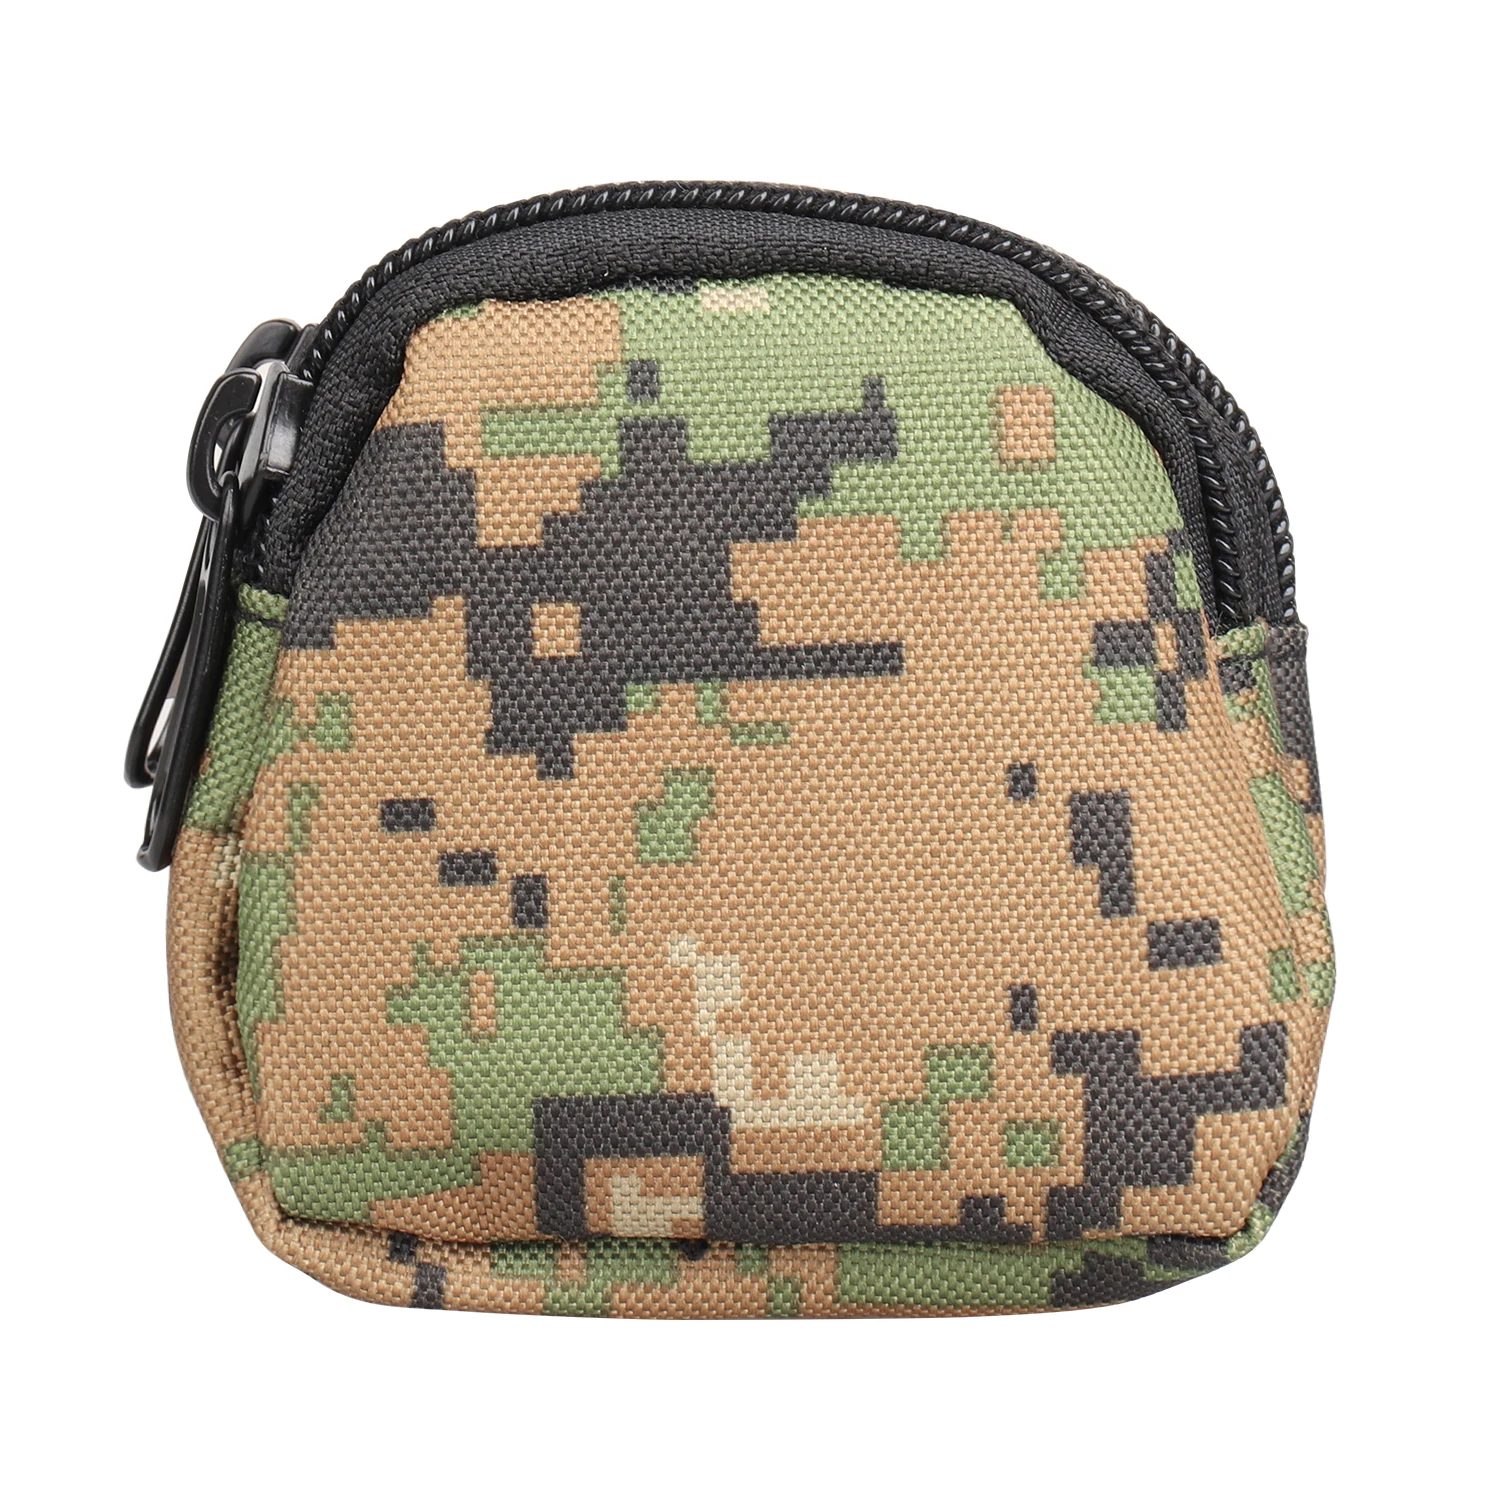 FIREDOG Coin Purse Camouflage Multi-Function Coin Purse Small Change Money Bags Fashion Mini Wallet Waist Bag Lighter Key Case